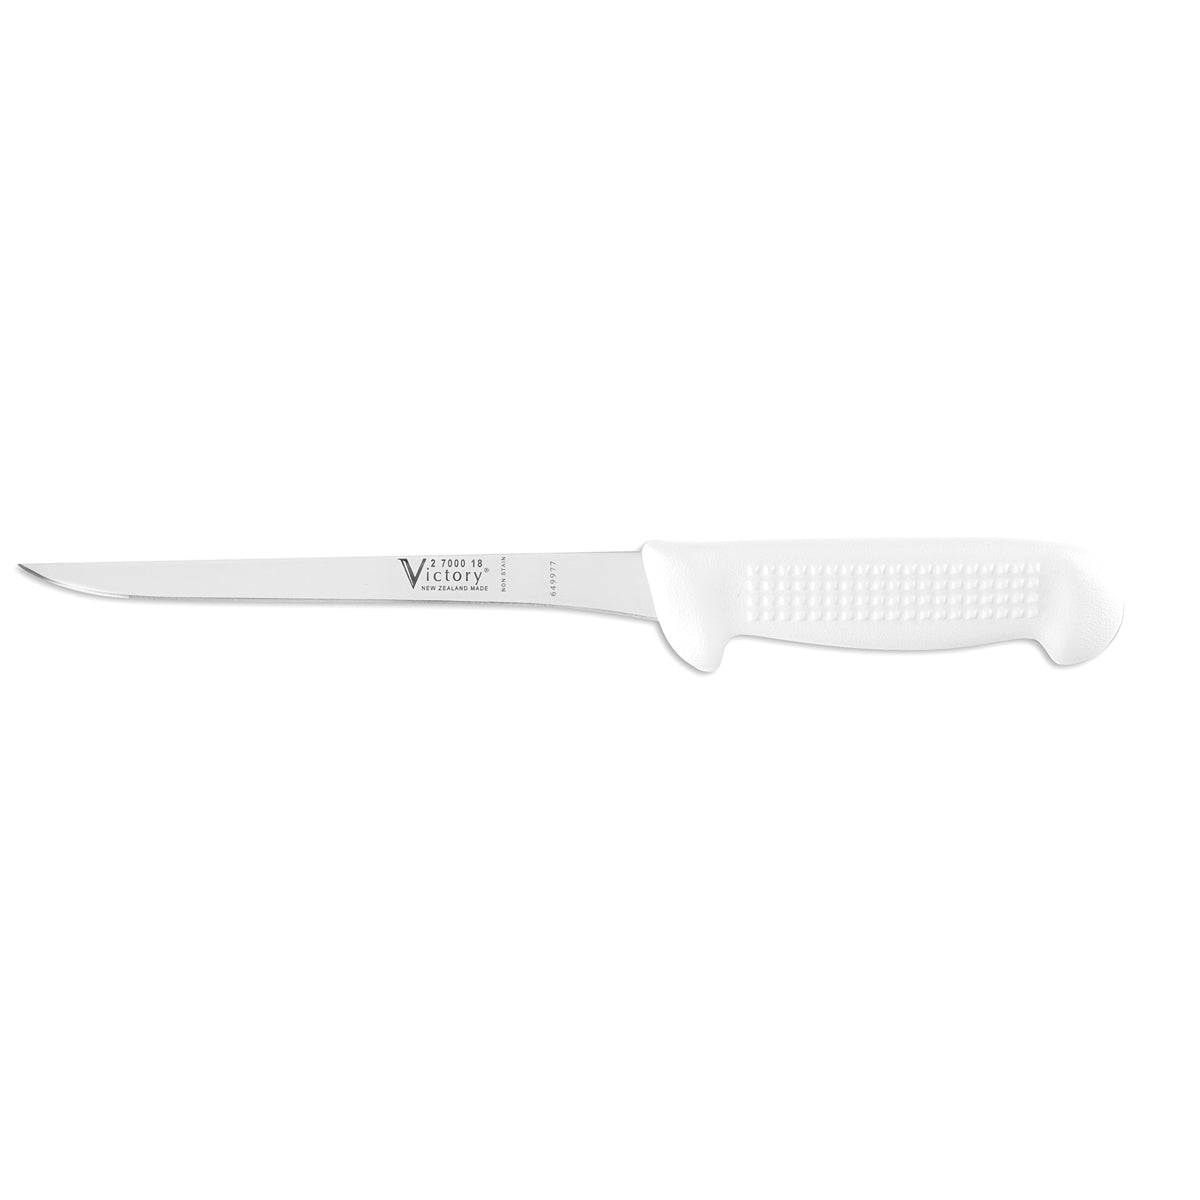 Victory Knives 18cm Stainless Steel Flexible Straight Boning/Filleting Knife 2 7000 18